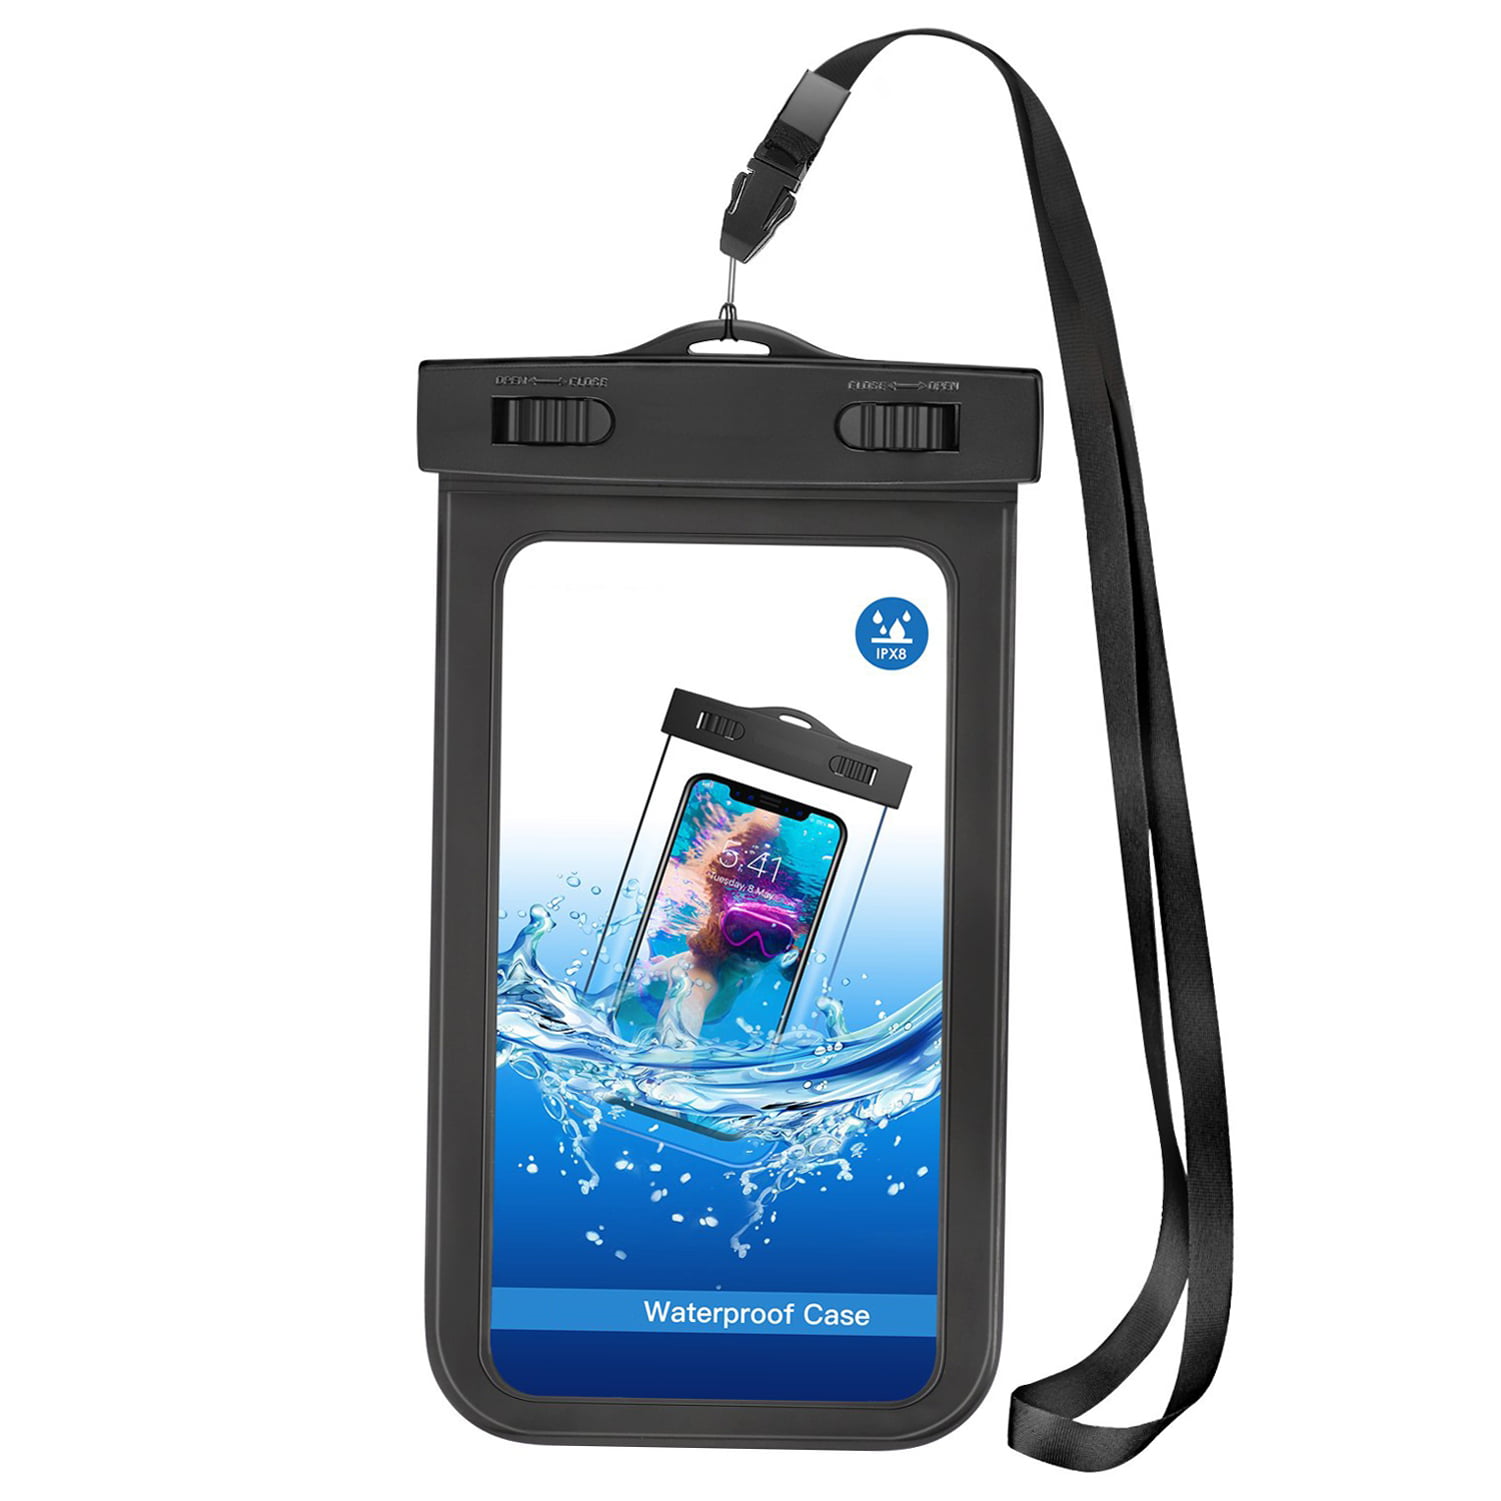 Armband Band for LG g2 g3 g4 cc1 Pool Sea 2in1 Waterproof Case 